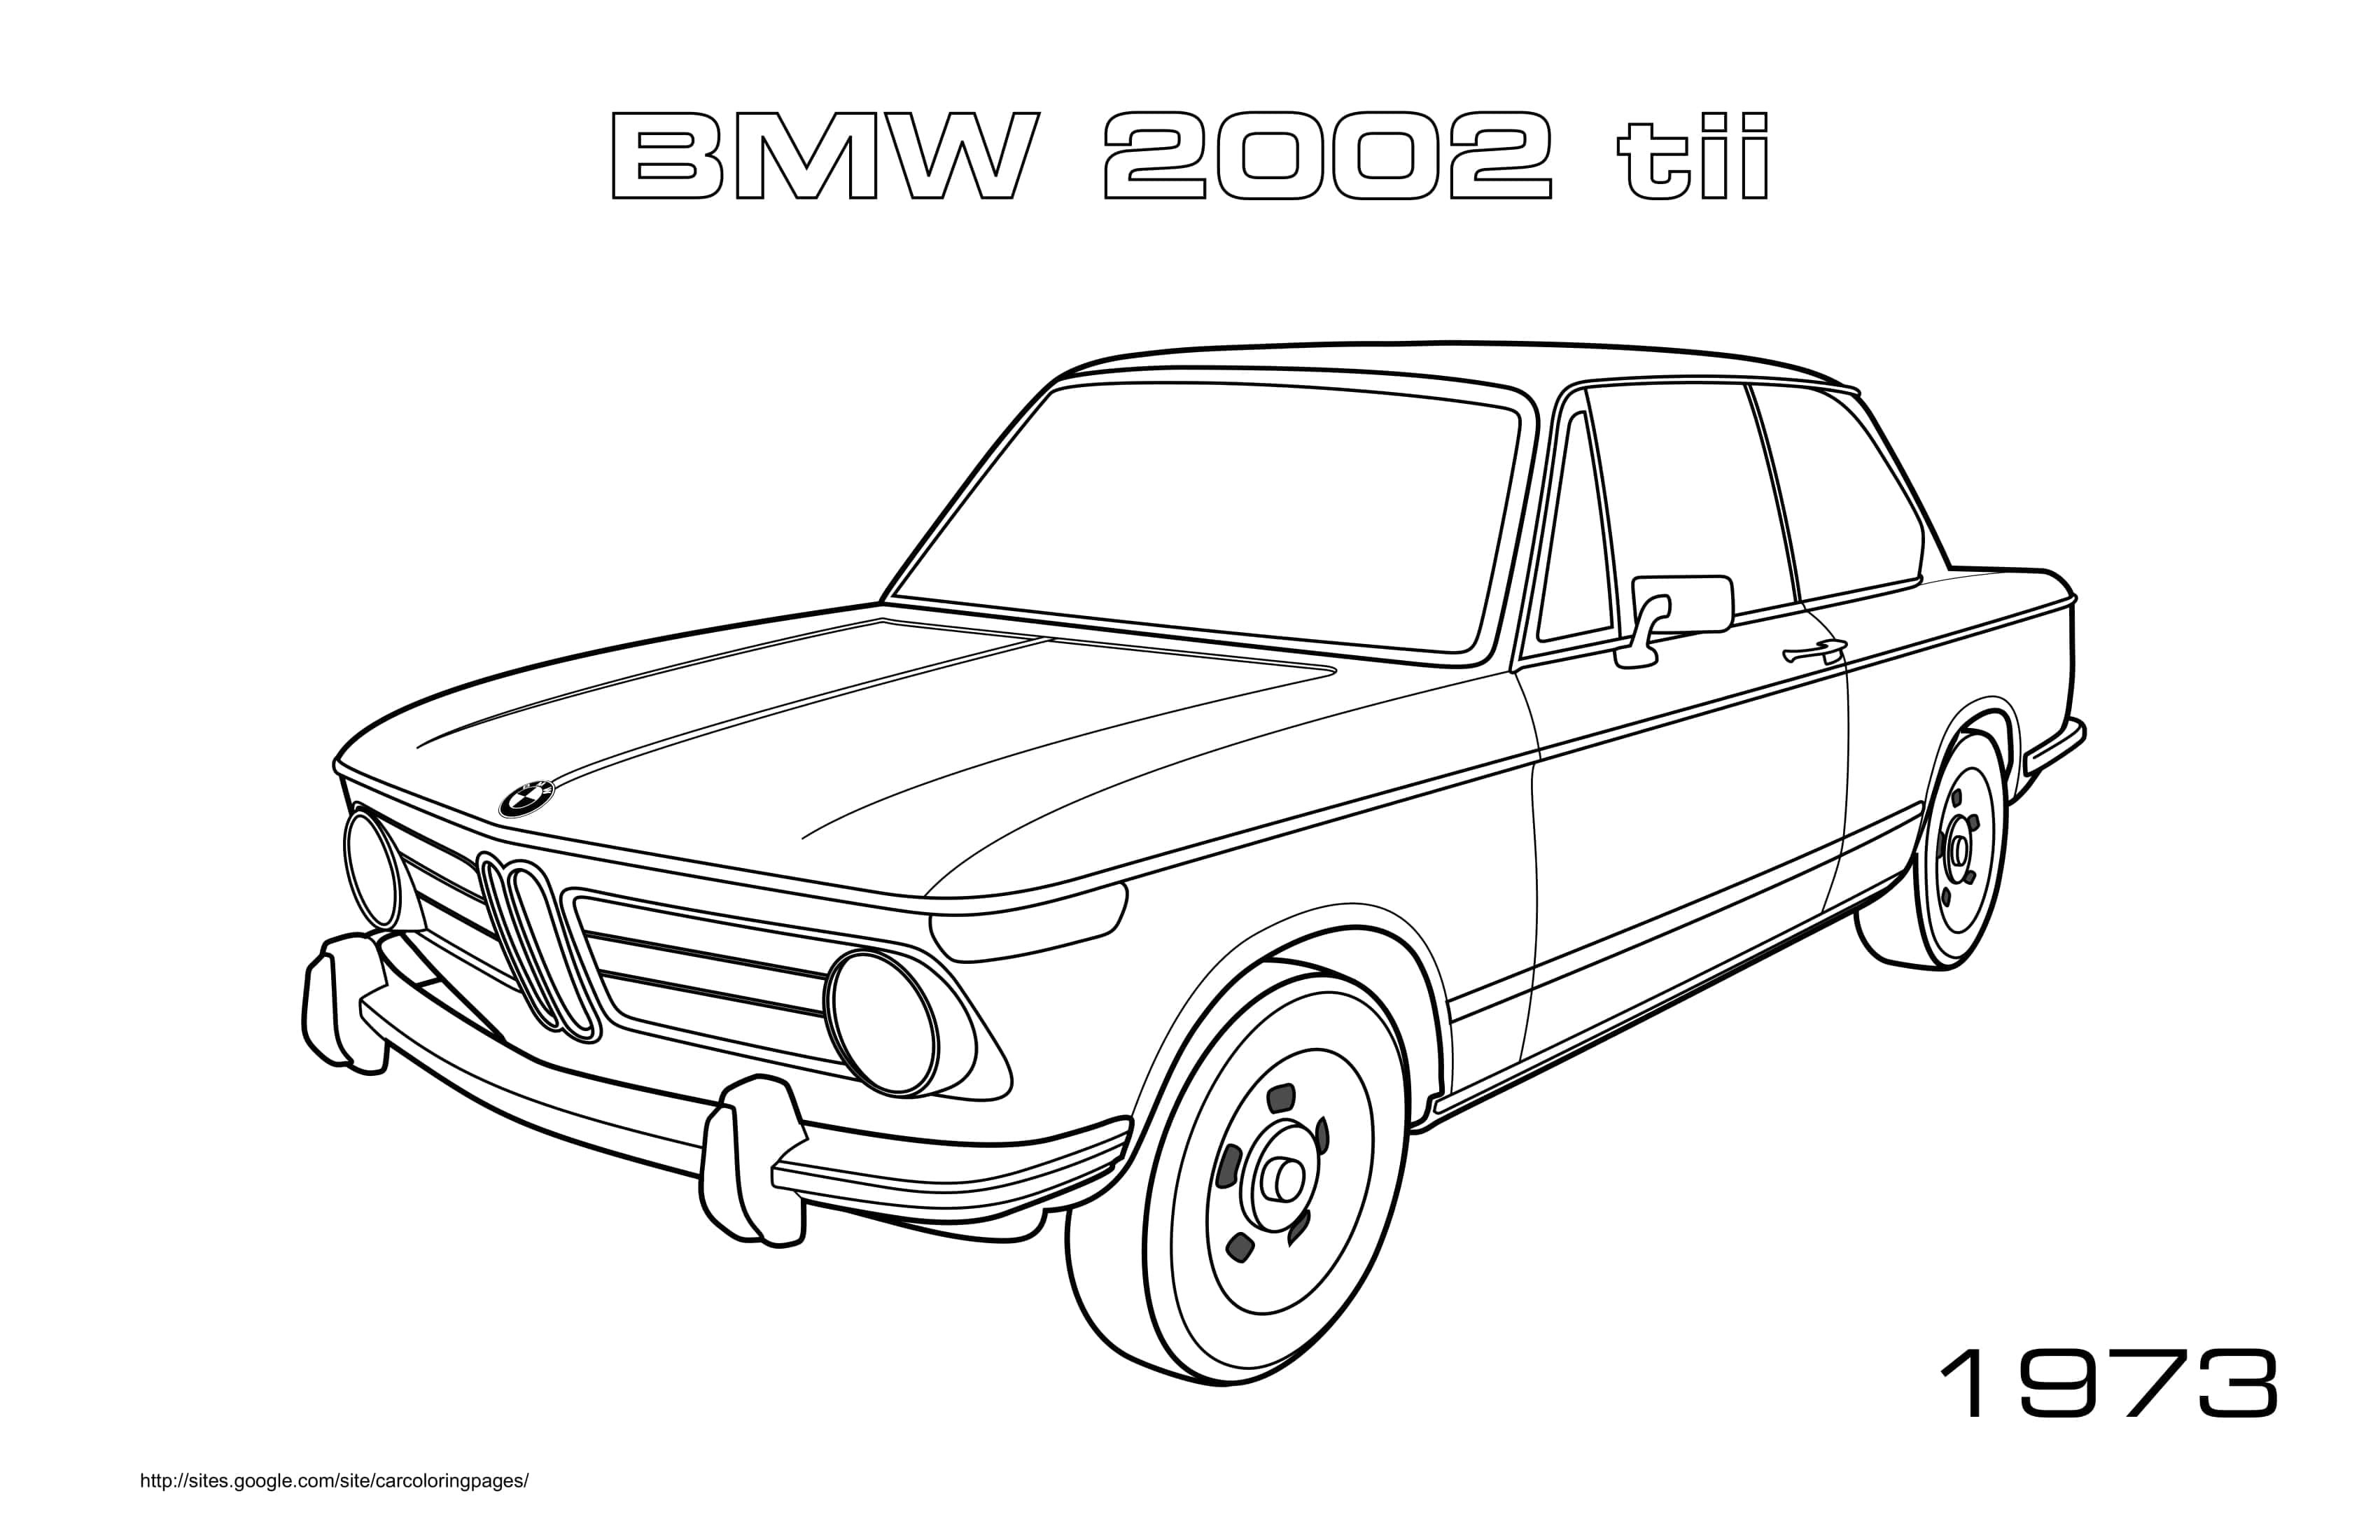 Bmw 2002 Tii 1973 Coloring Page